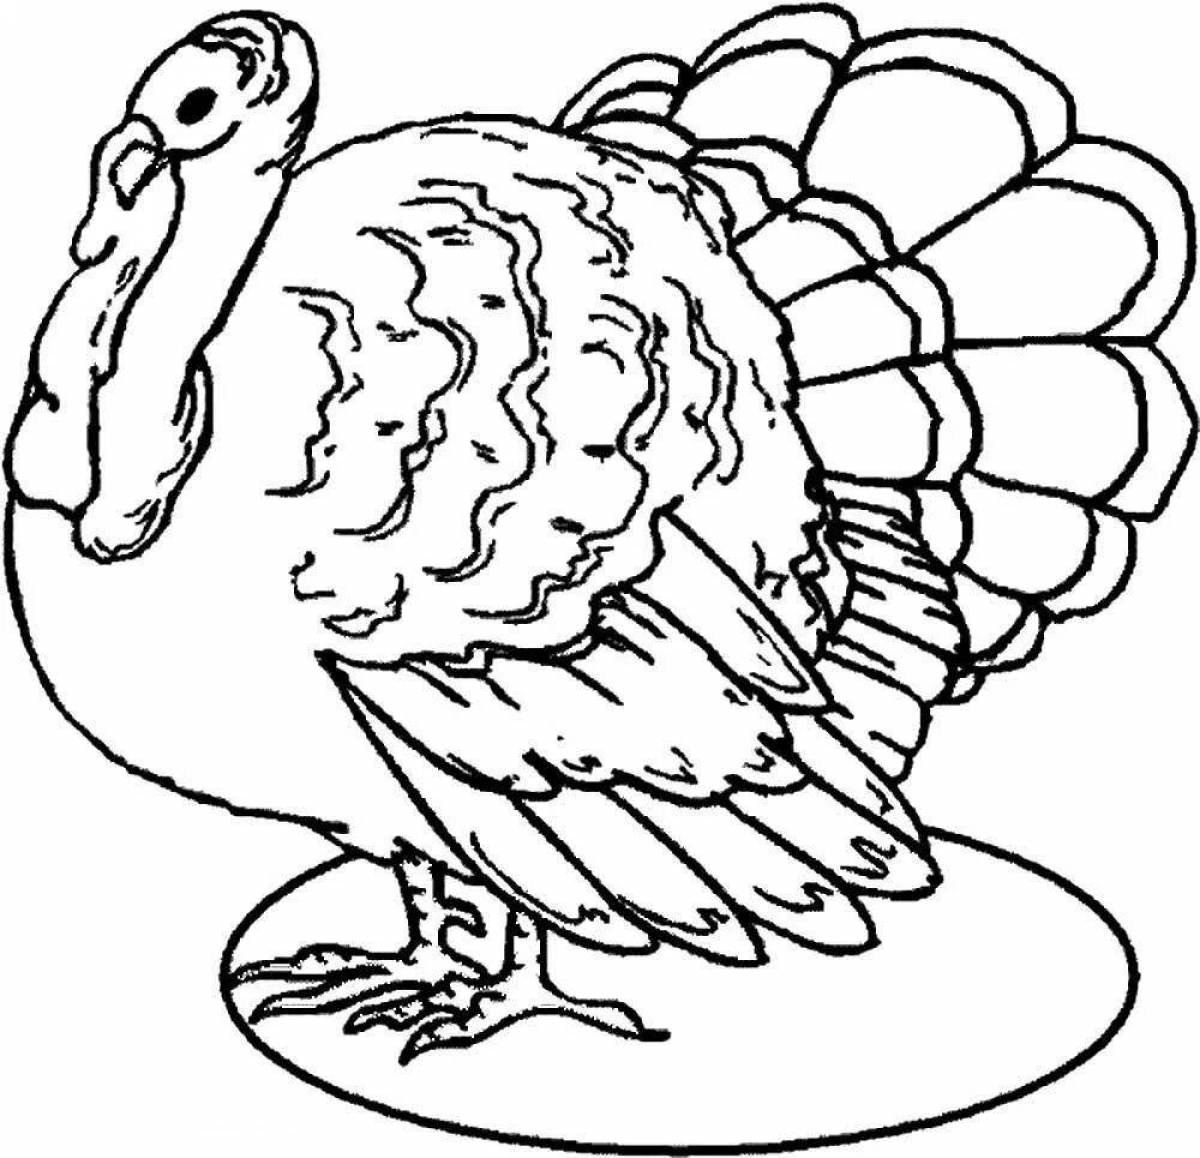 Tempting bird coloring page for 6-7 year olds